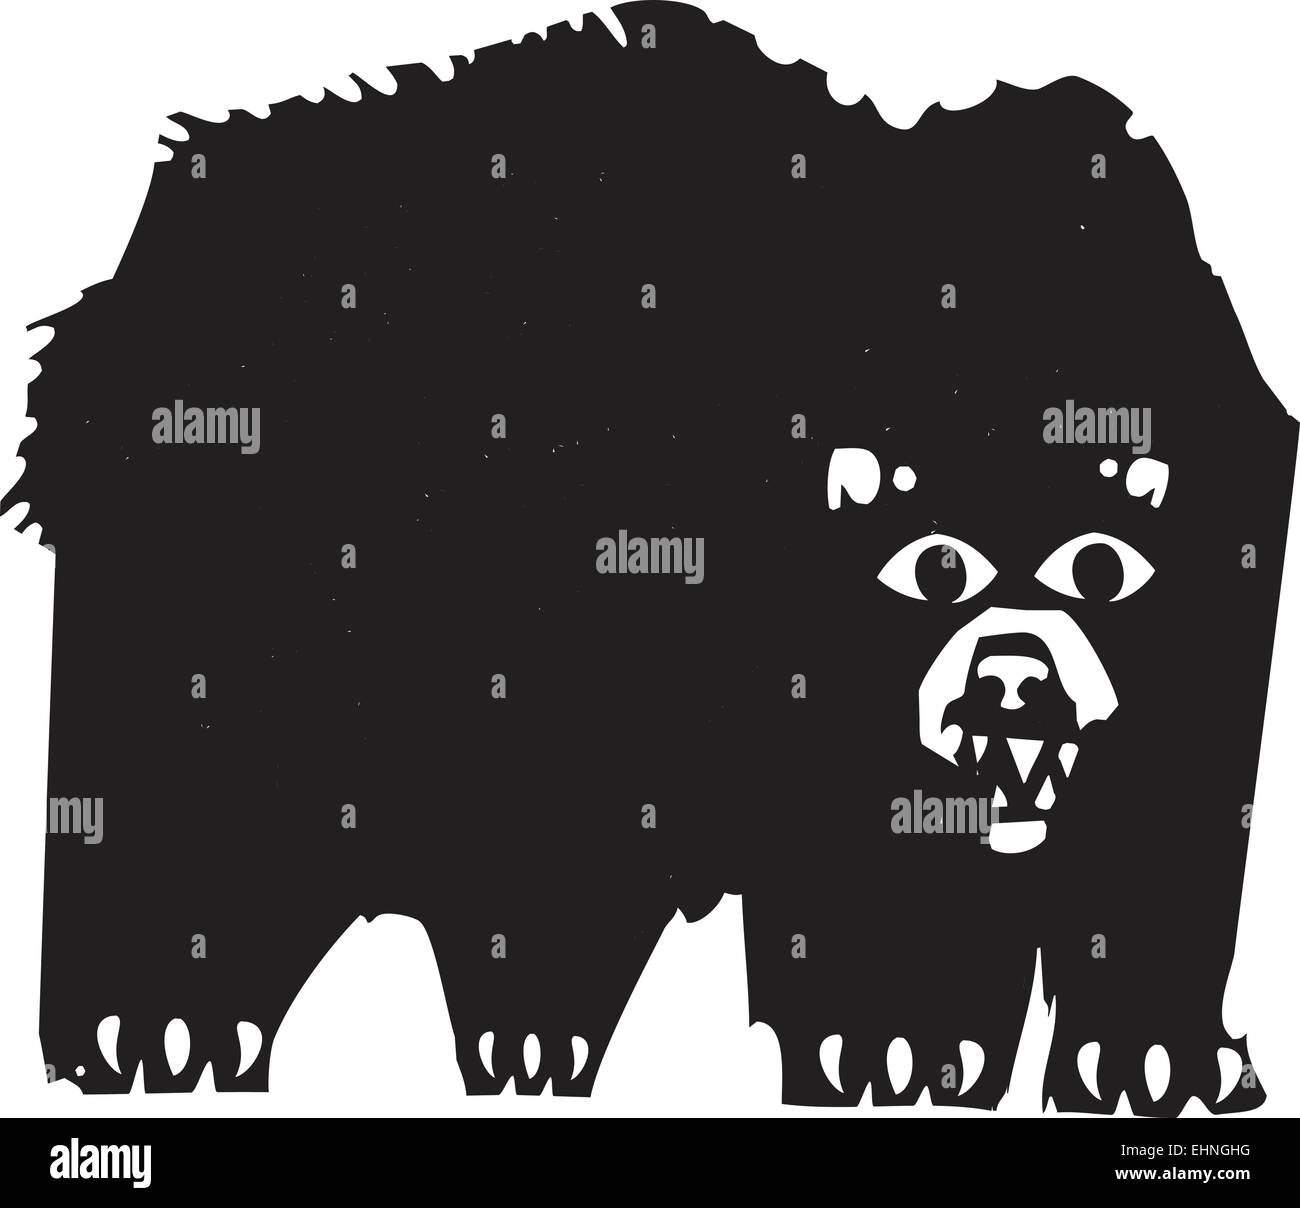 Woodcut style image of a a growling black bear. Stock Vector